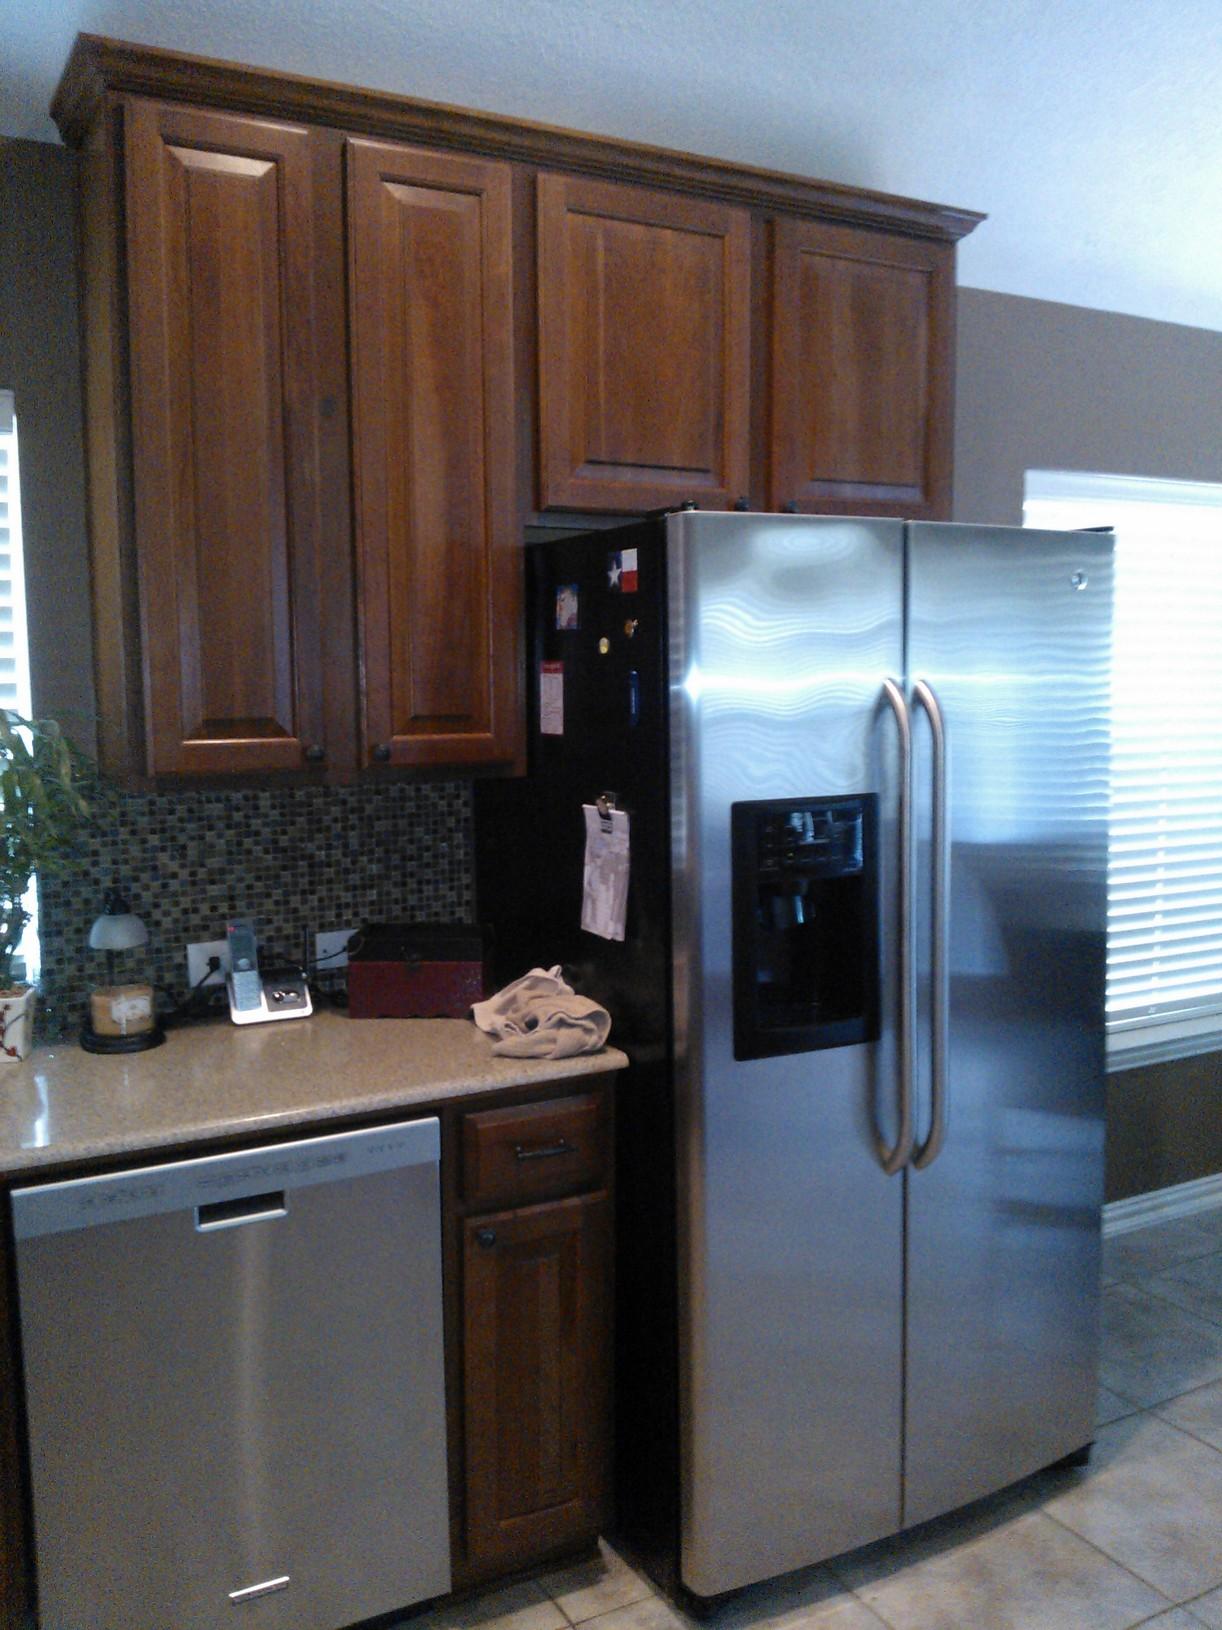 Upon your arrival home, you'll find appliances clean and brilliantly shining!